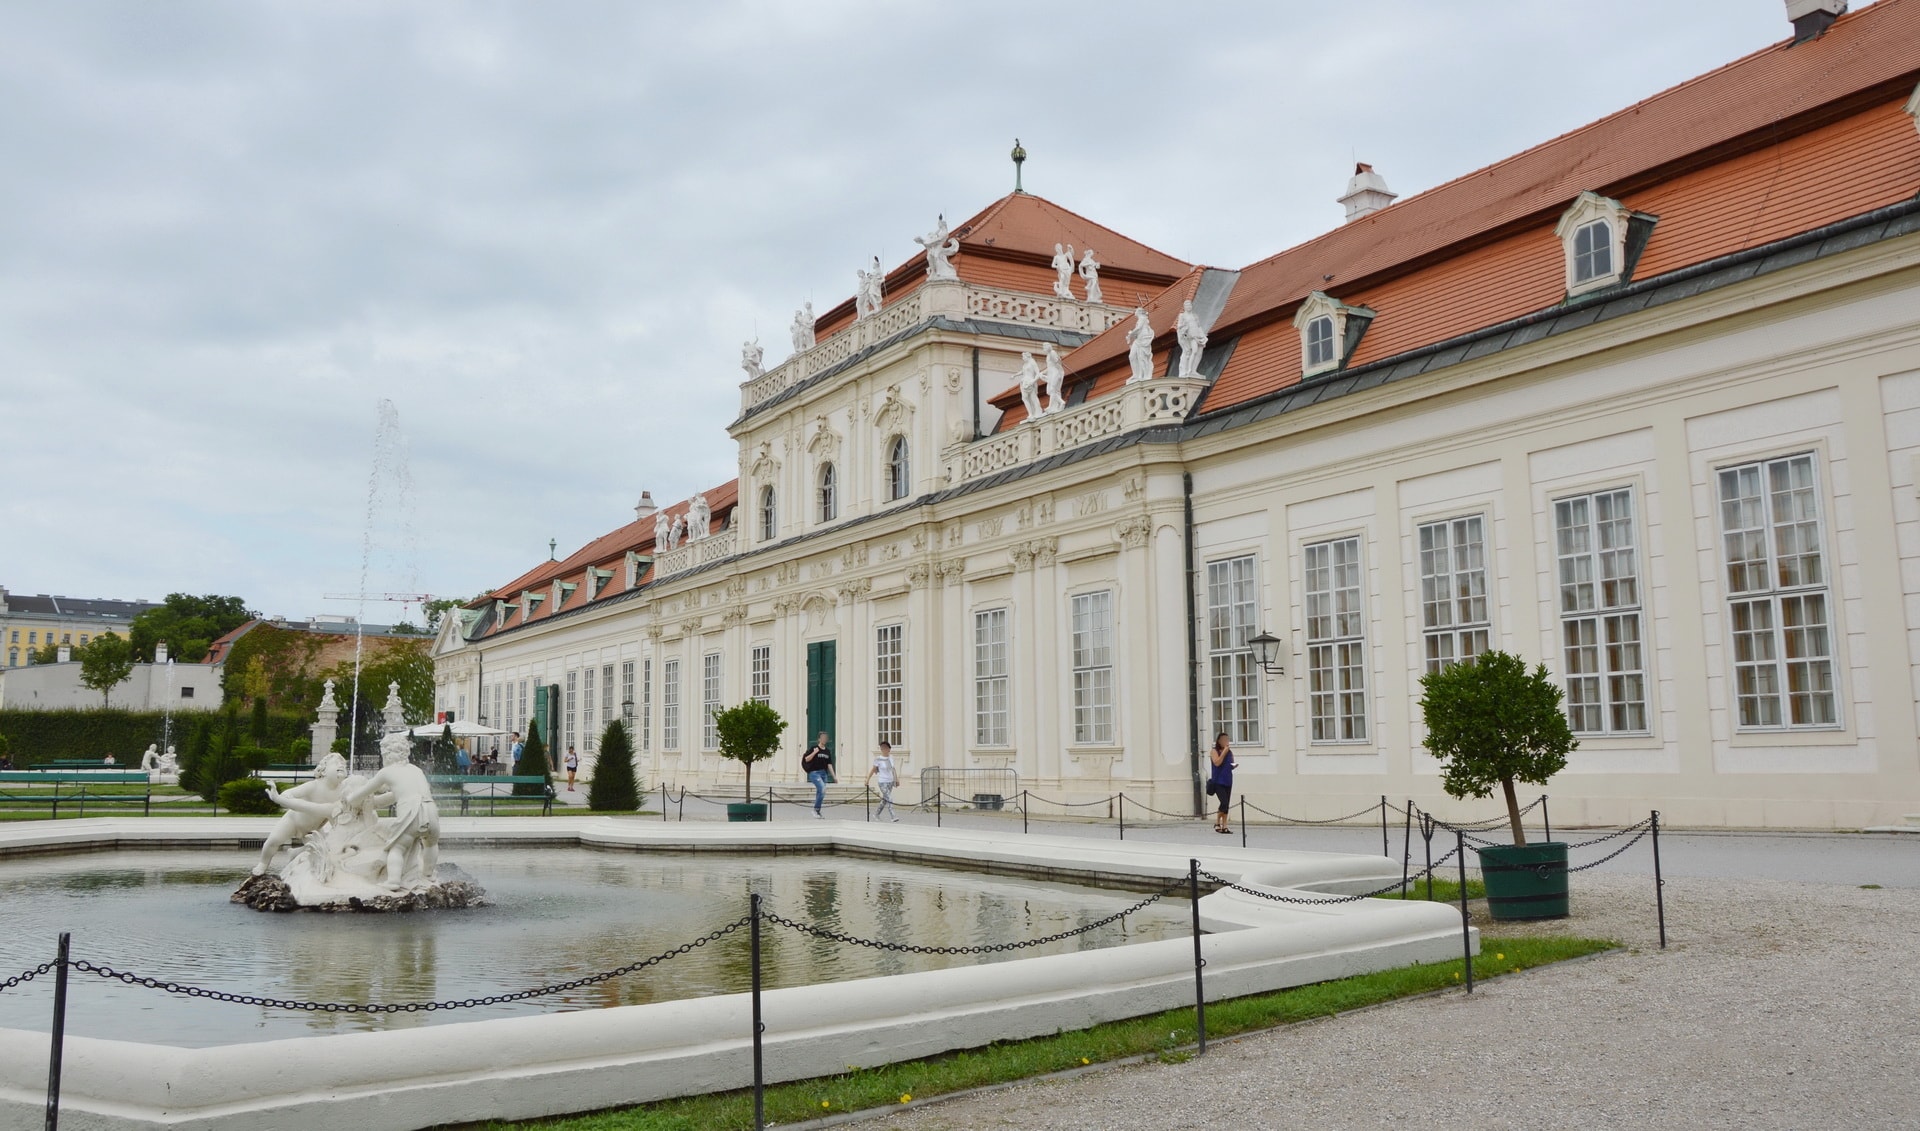 Lower Belvedere served as a residential palace